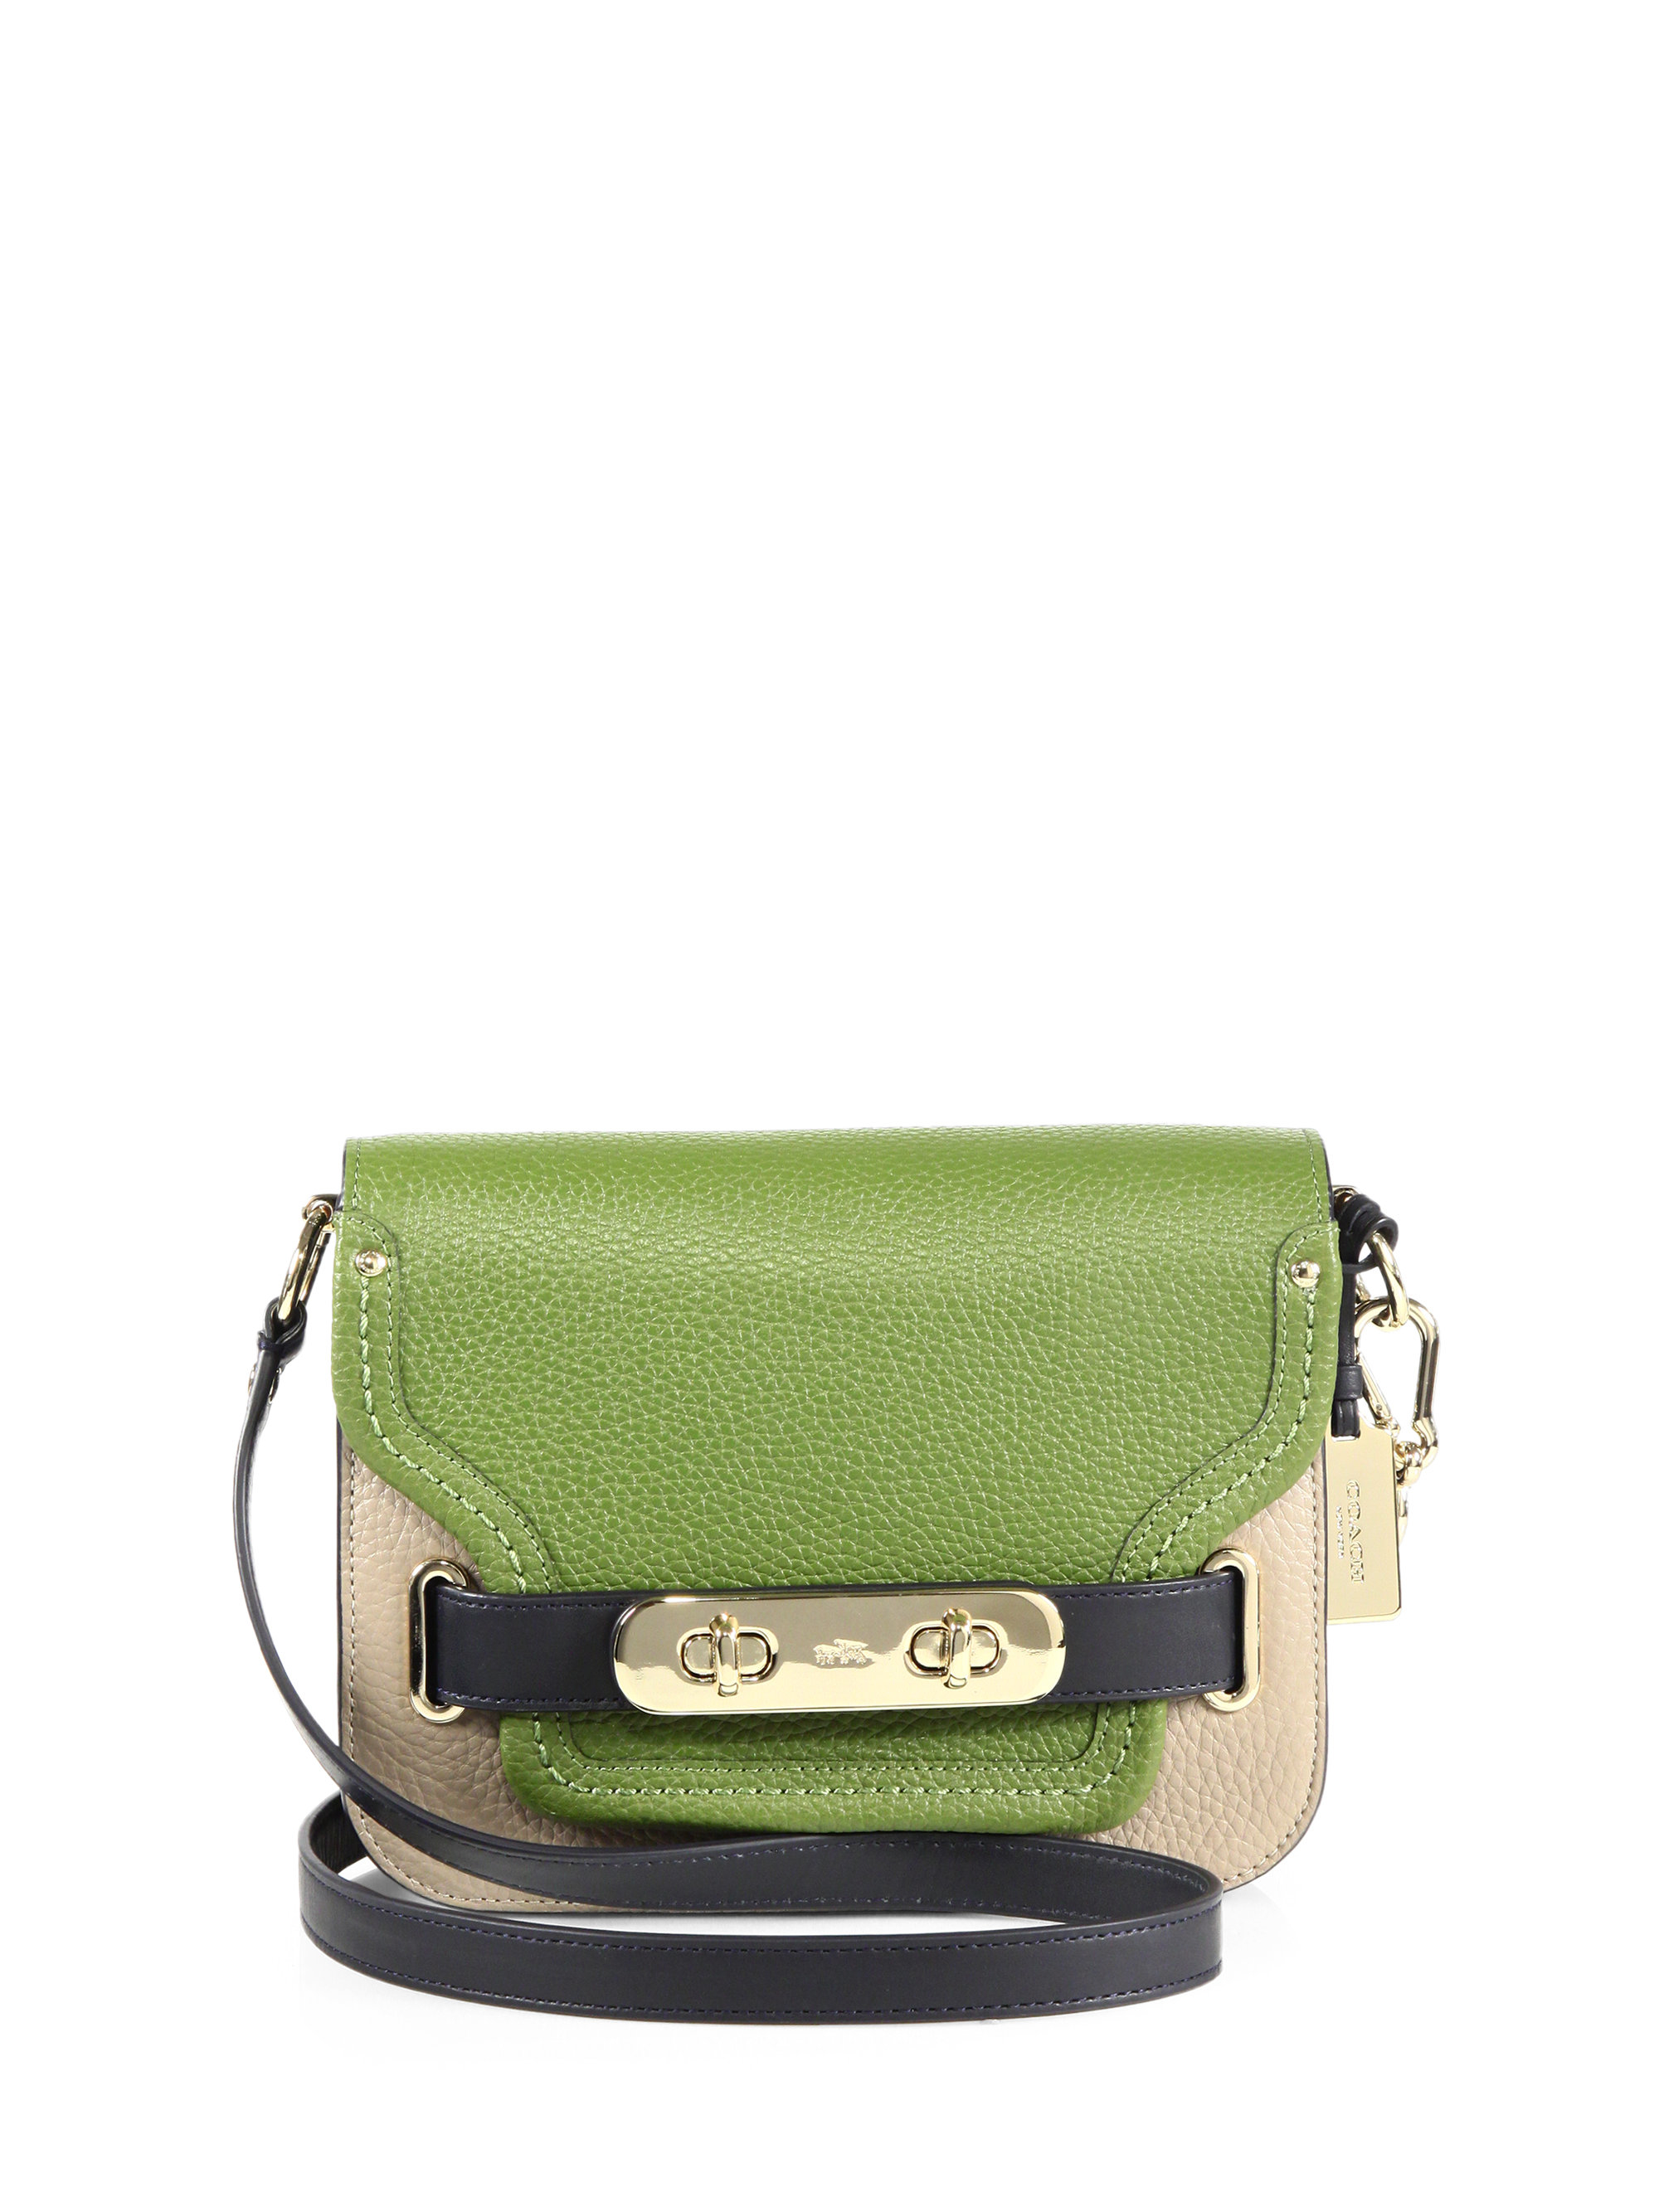 Lyst - Coach Swagger Small Colorblock Leather Crossbody Bag in Green